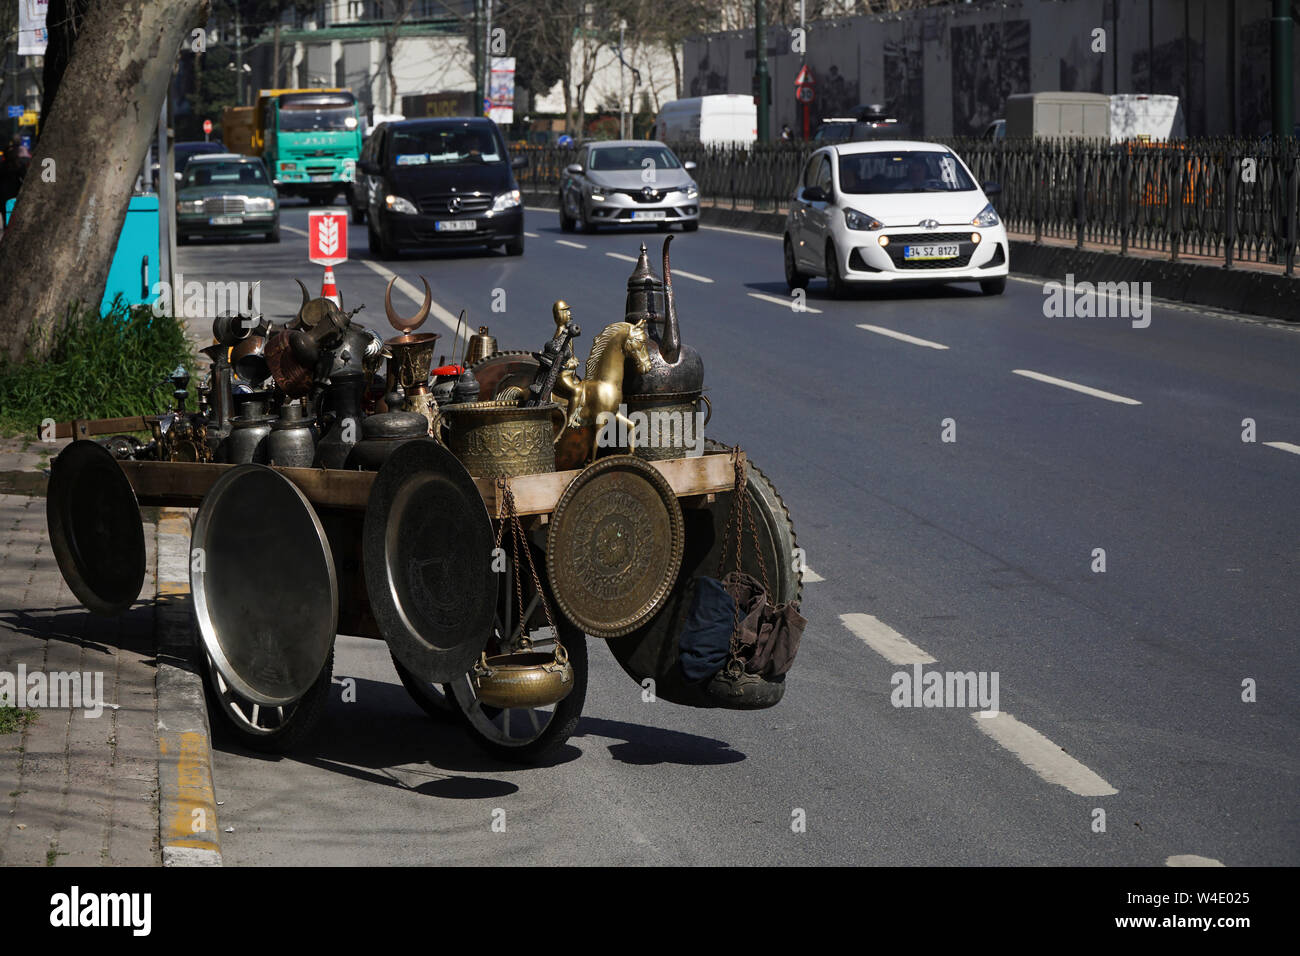 Istanbul, Turkey - April 5, 2018 : There are many antique metal objects on a wheelbarrow at road with vehicles. Like trays, bowls and pitchers. Stock Photo